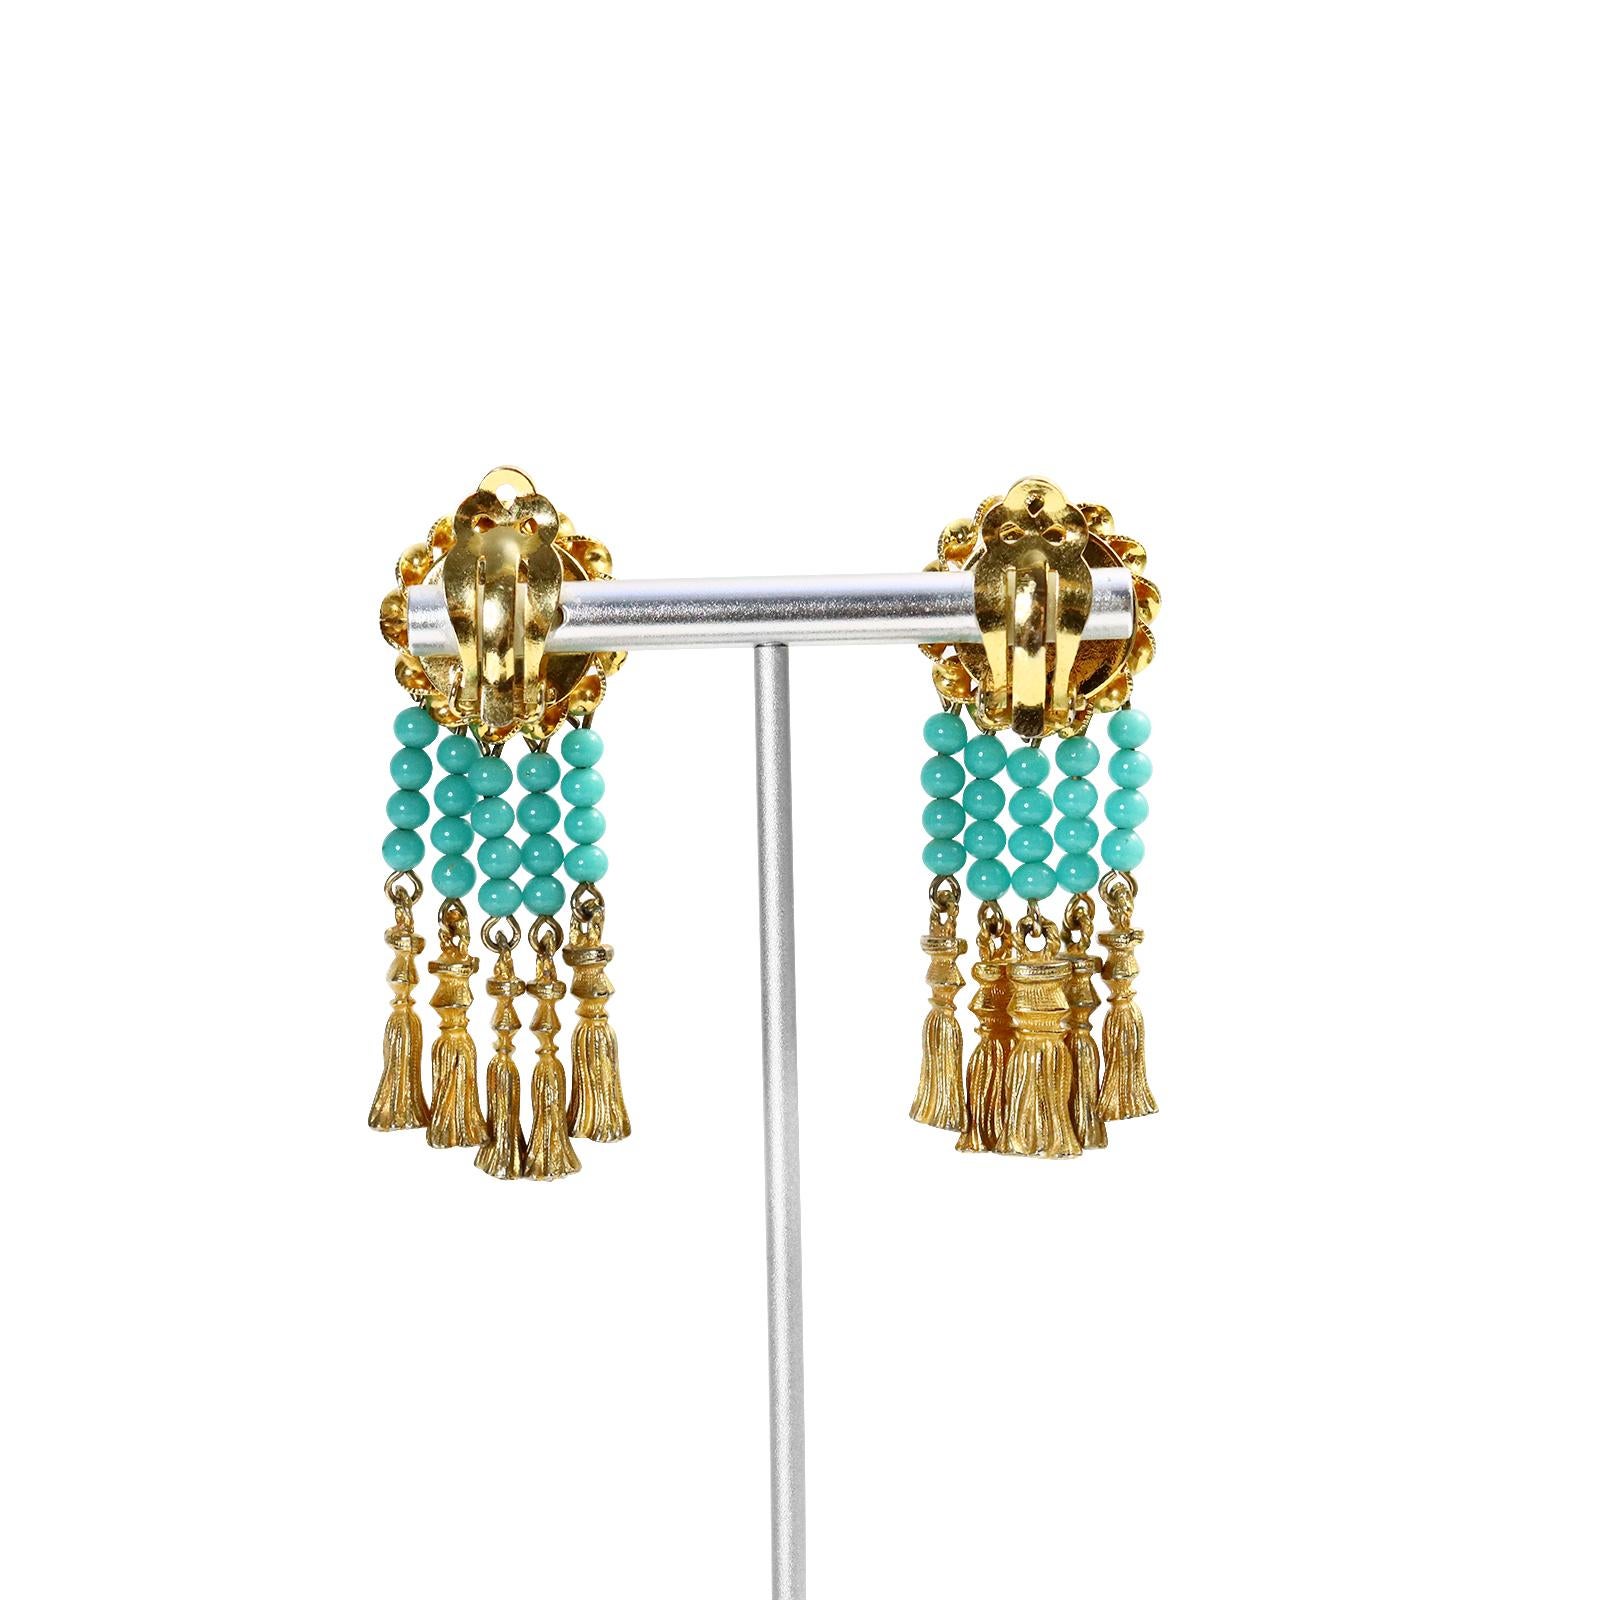 Vintage deLillo Faux Turquoise and Gold Tone Dangling Earrings Circa 1970s For Sale 3